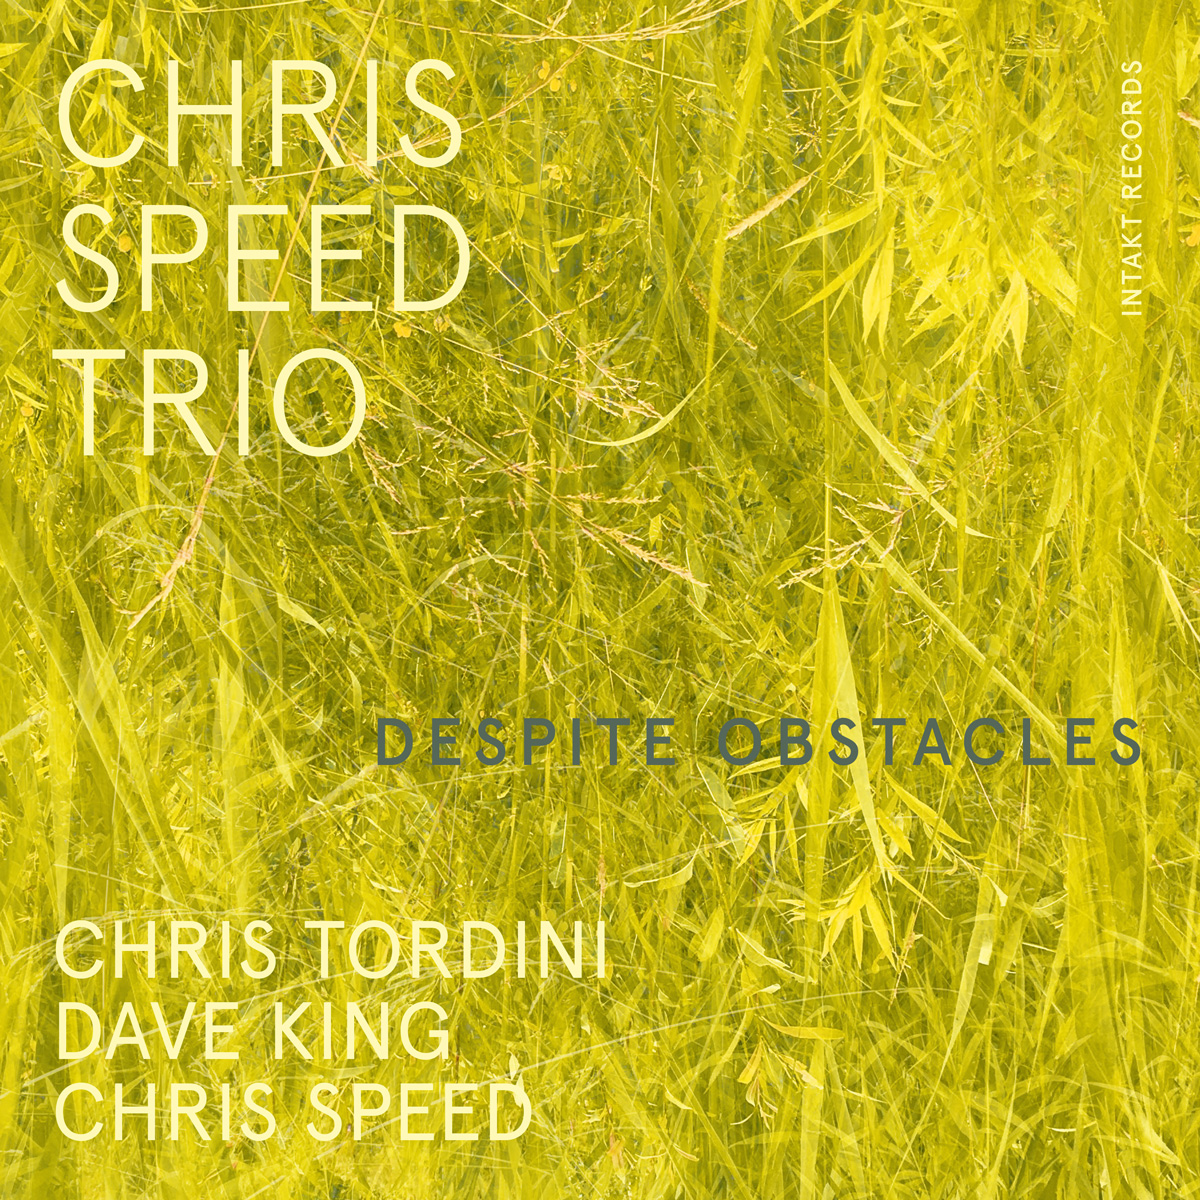 CHRIS SPEED TRIO
DESPITE OBSTACLES cover front